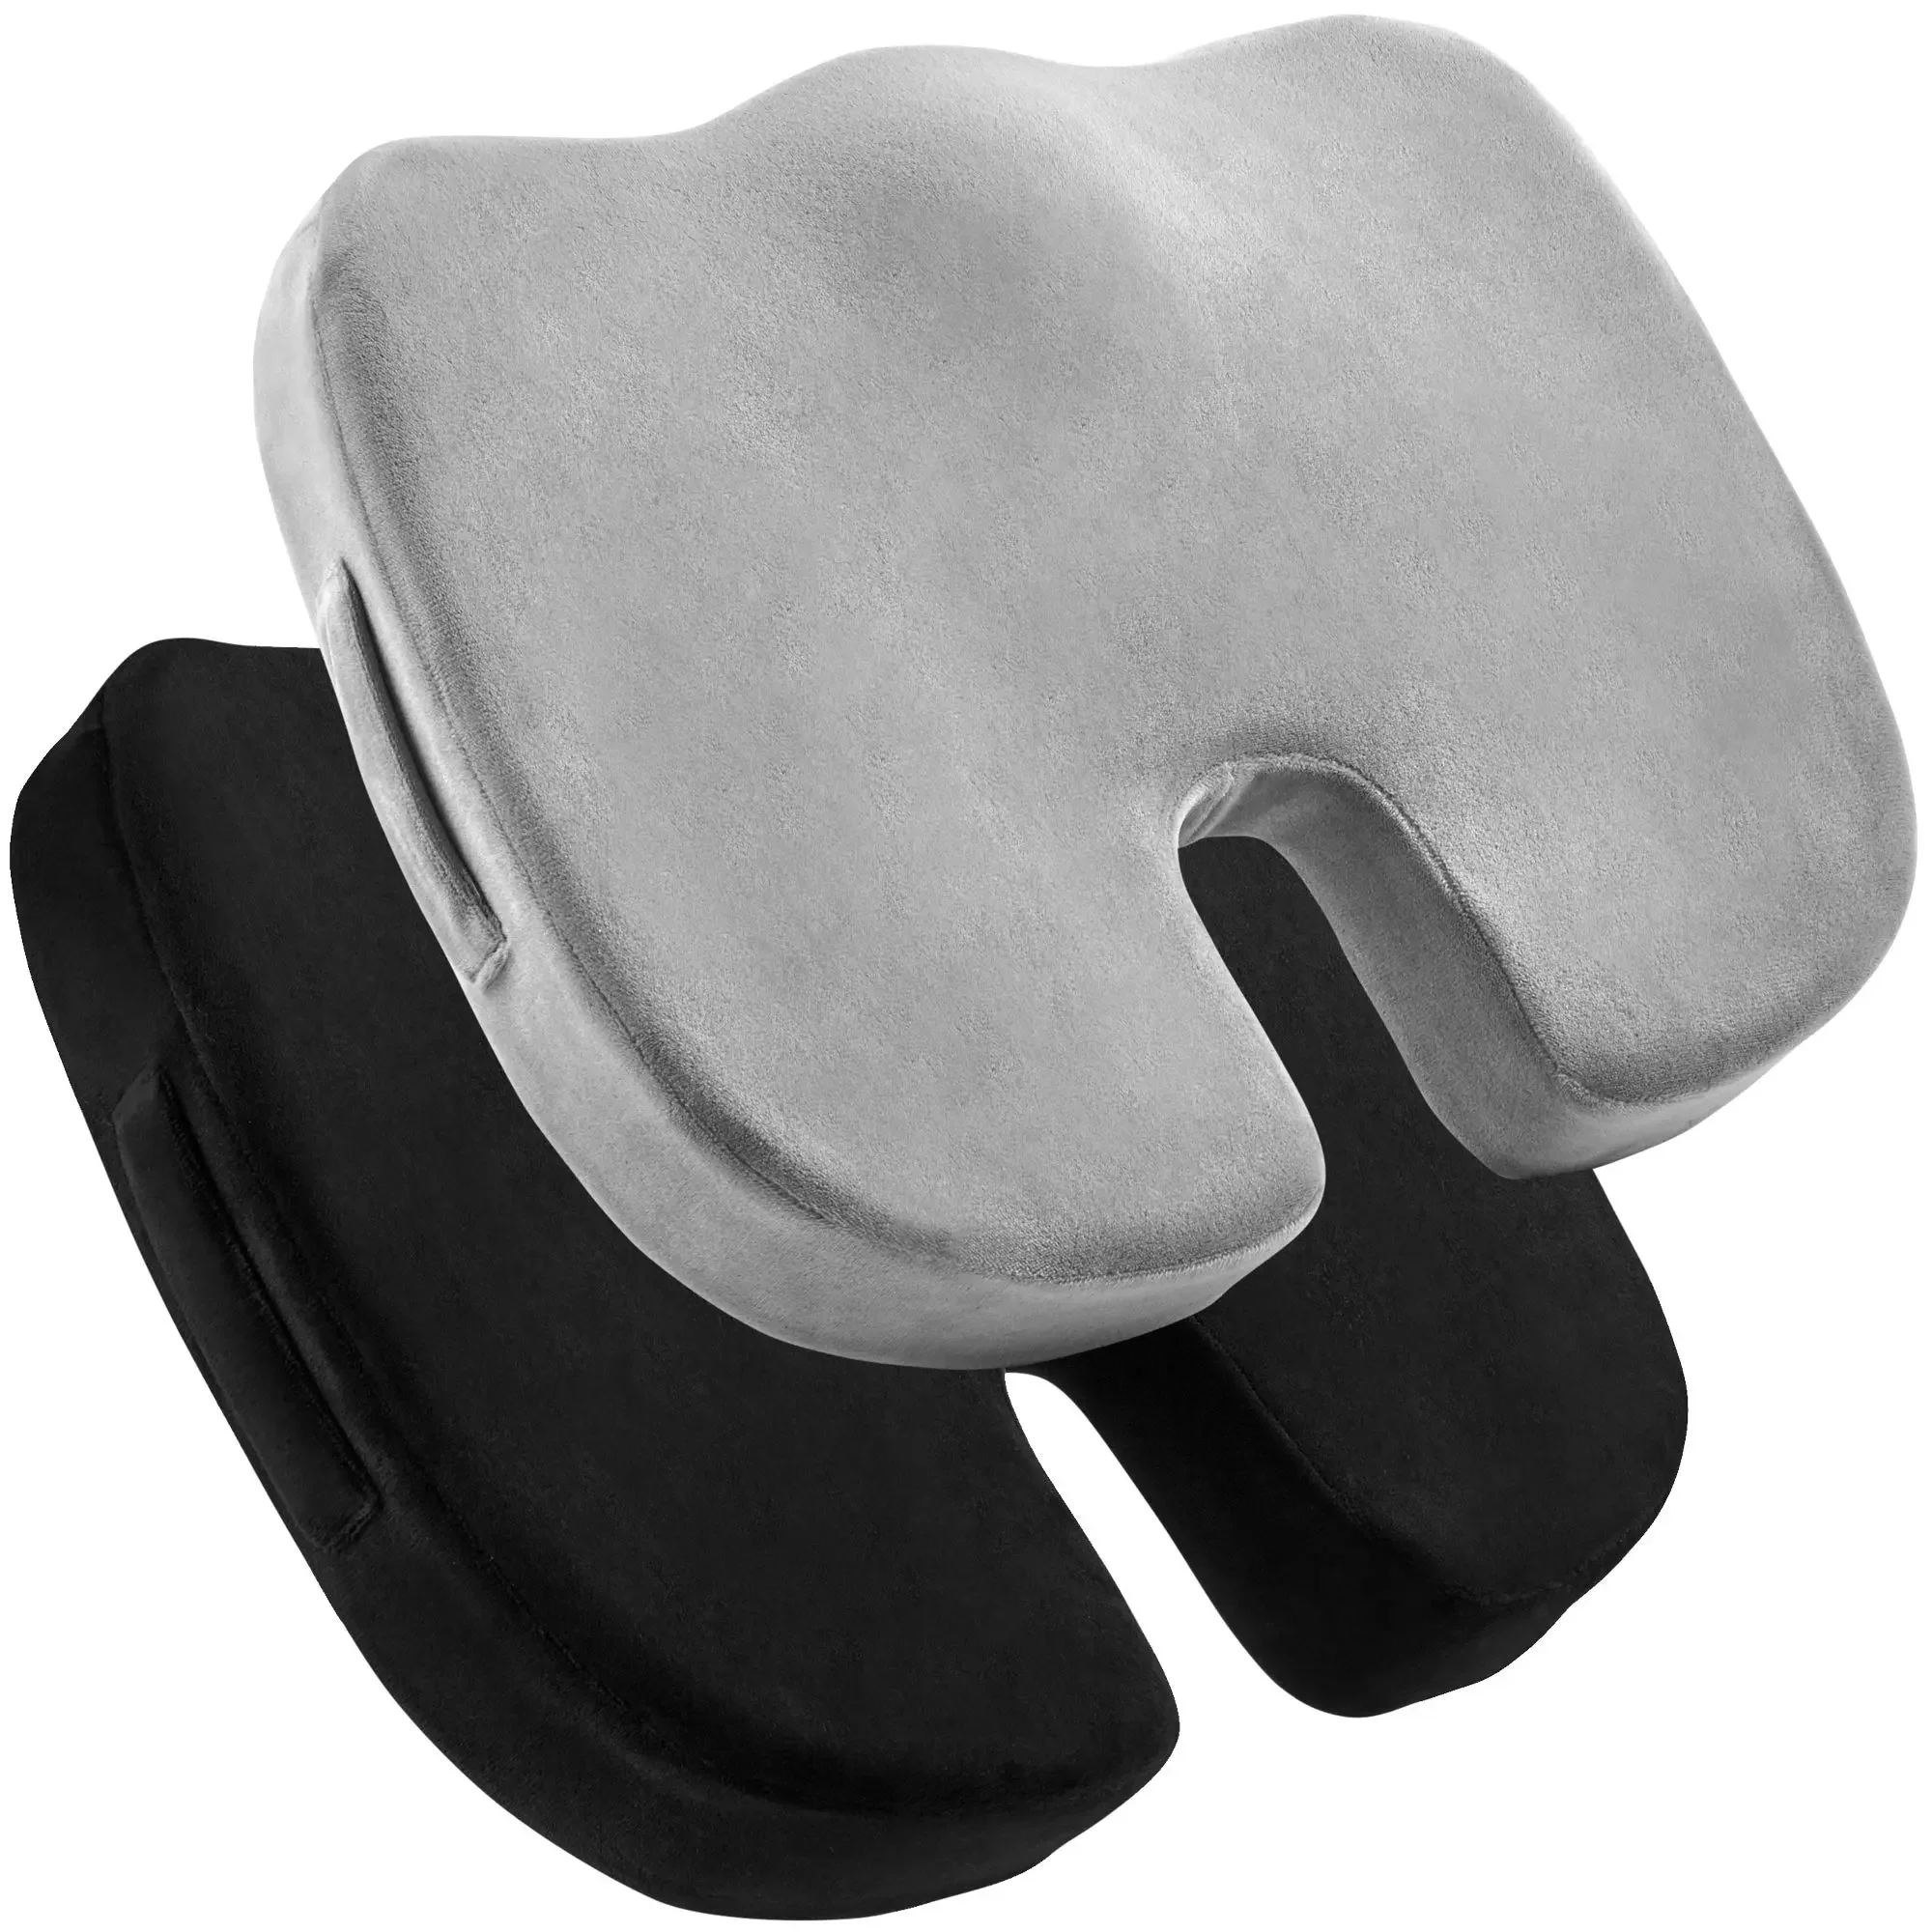 

Memory Foam U-Shaped Tailbone Pain Relief Seat Cushion for Office Chair, Car and Long Sitting, Designed for Maximum Comfort.